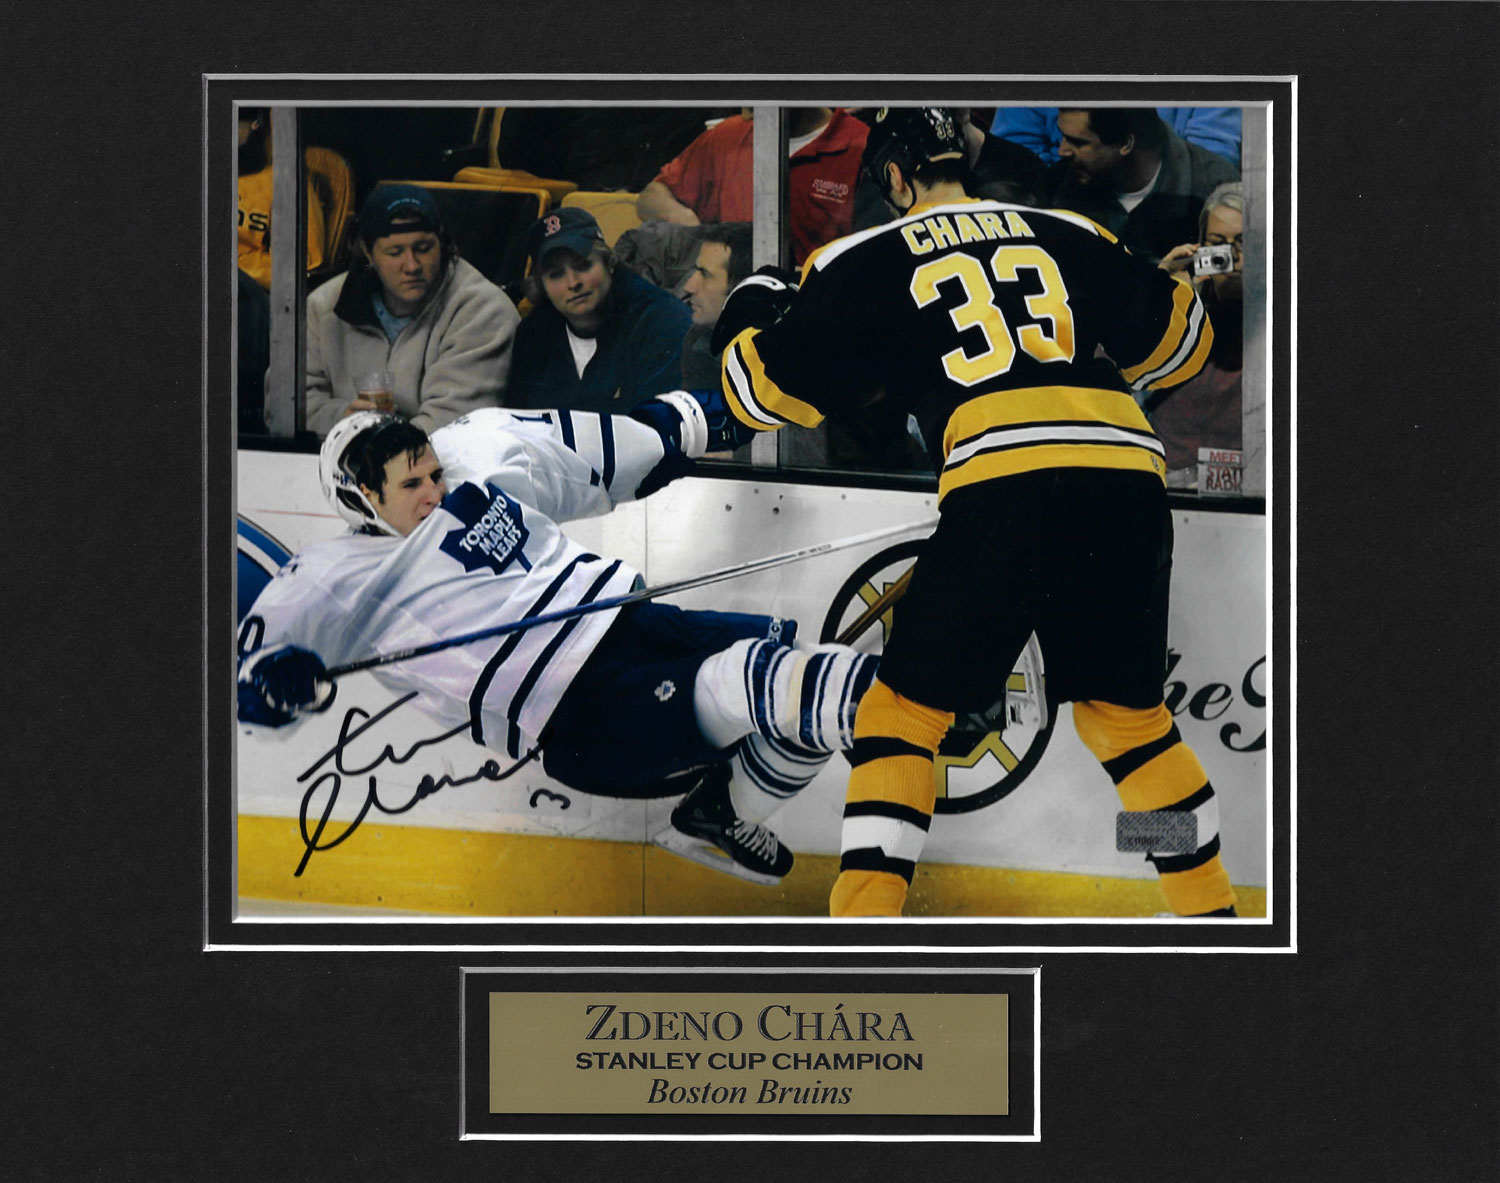 Torey Krug Photo Check Blues Player 11x14 - New England Picture